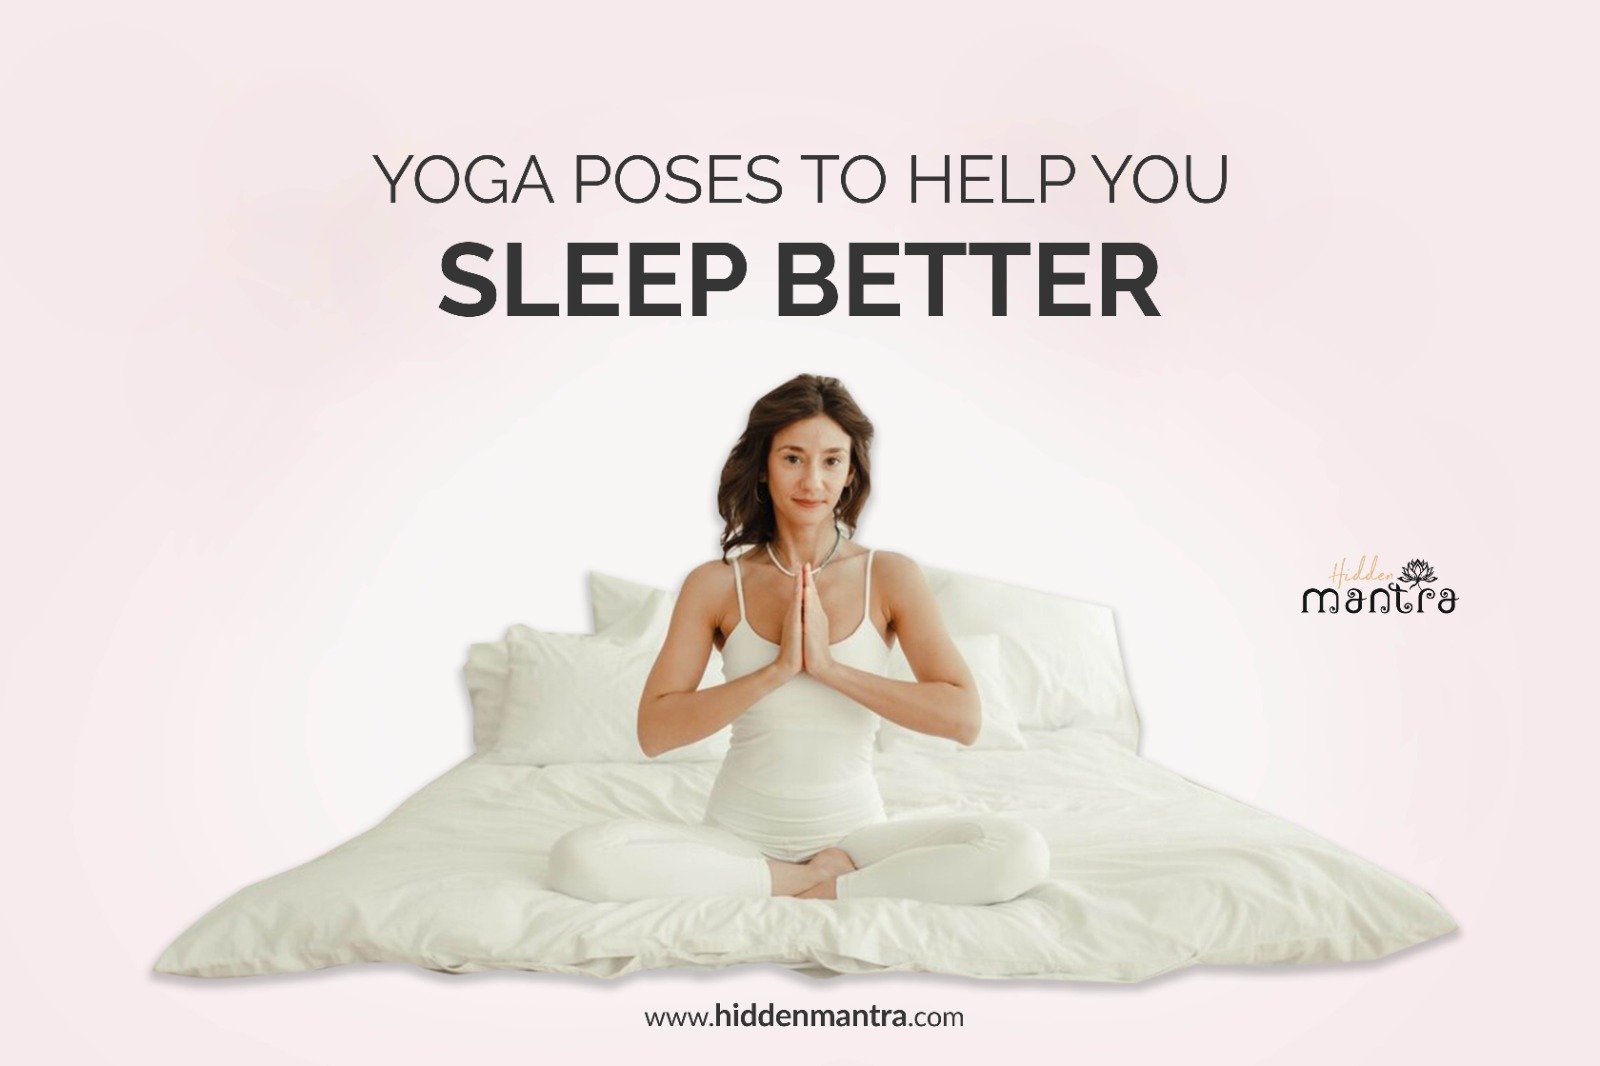 7 Yoga Poses for Insomnia Relax And Get better sleep - 7pranayama.com